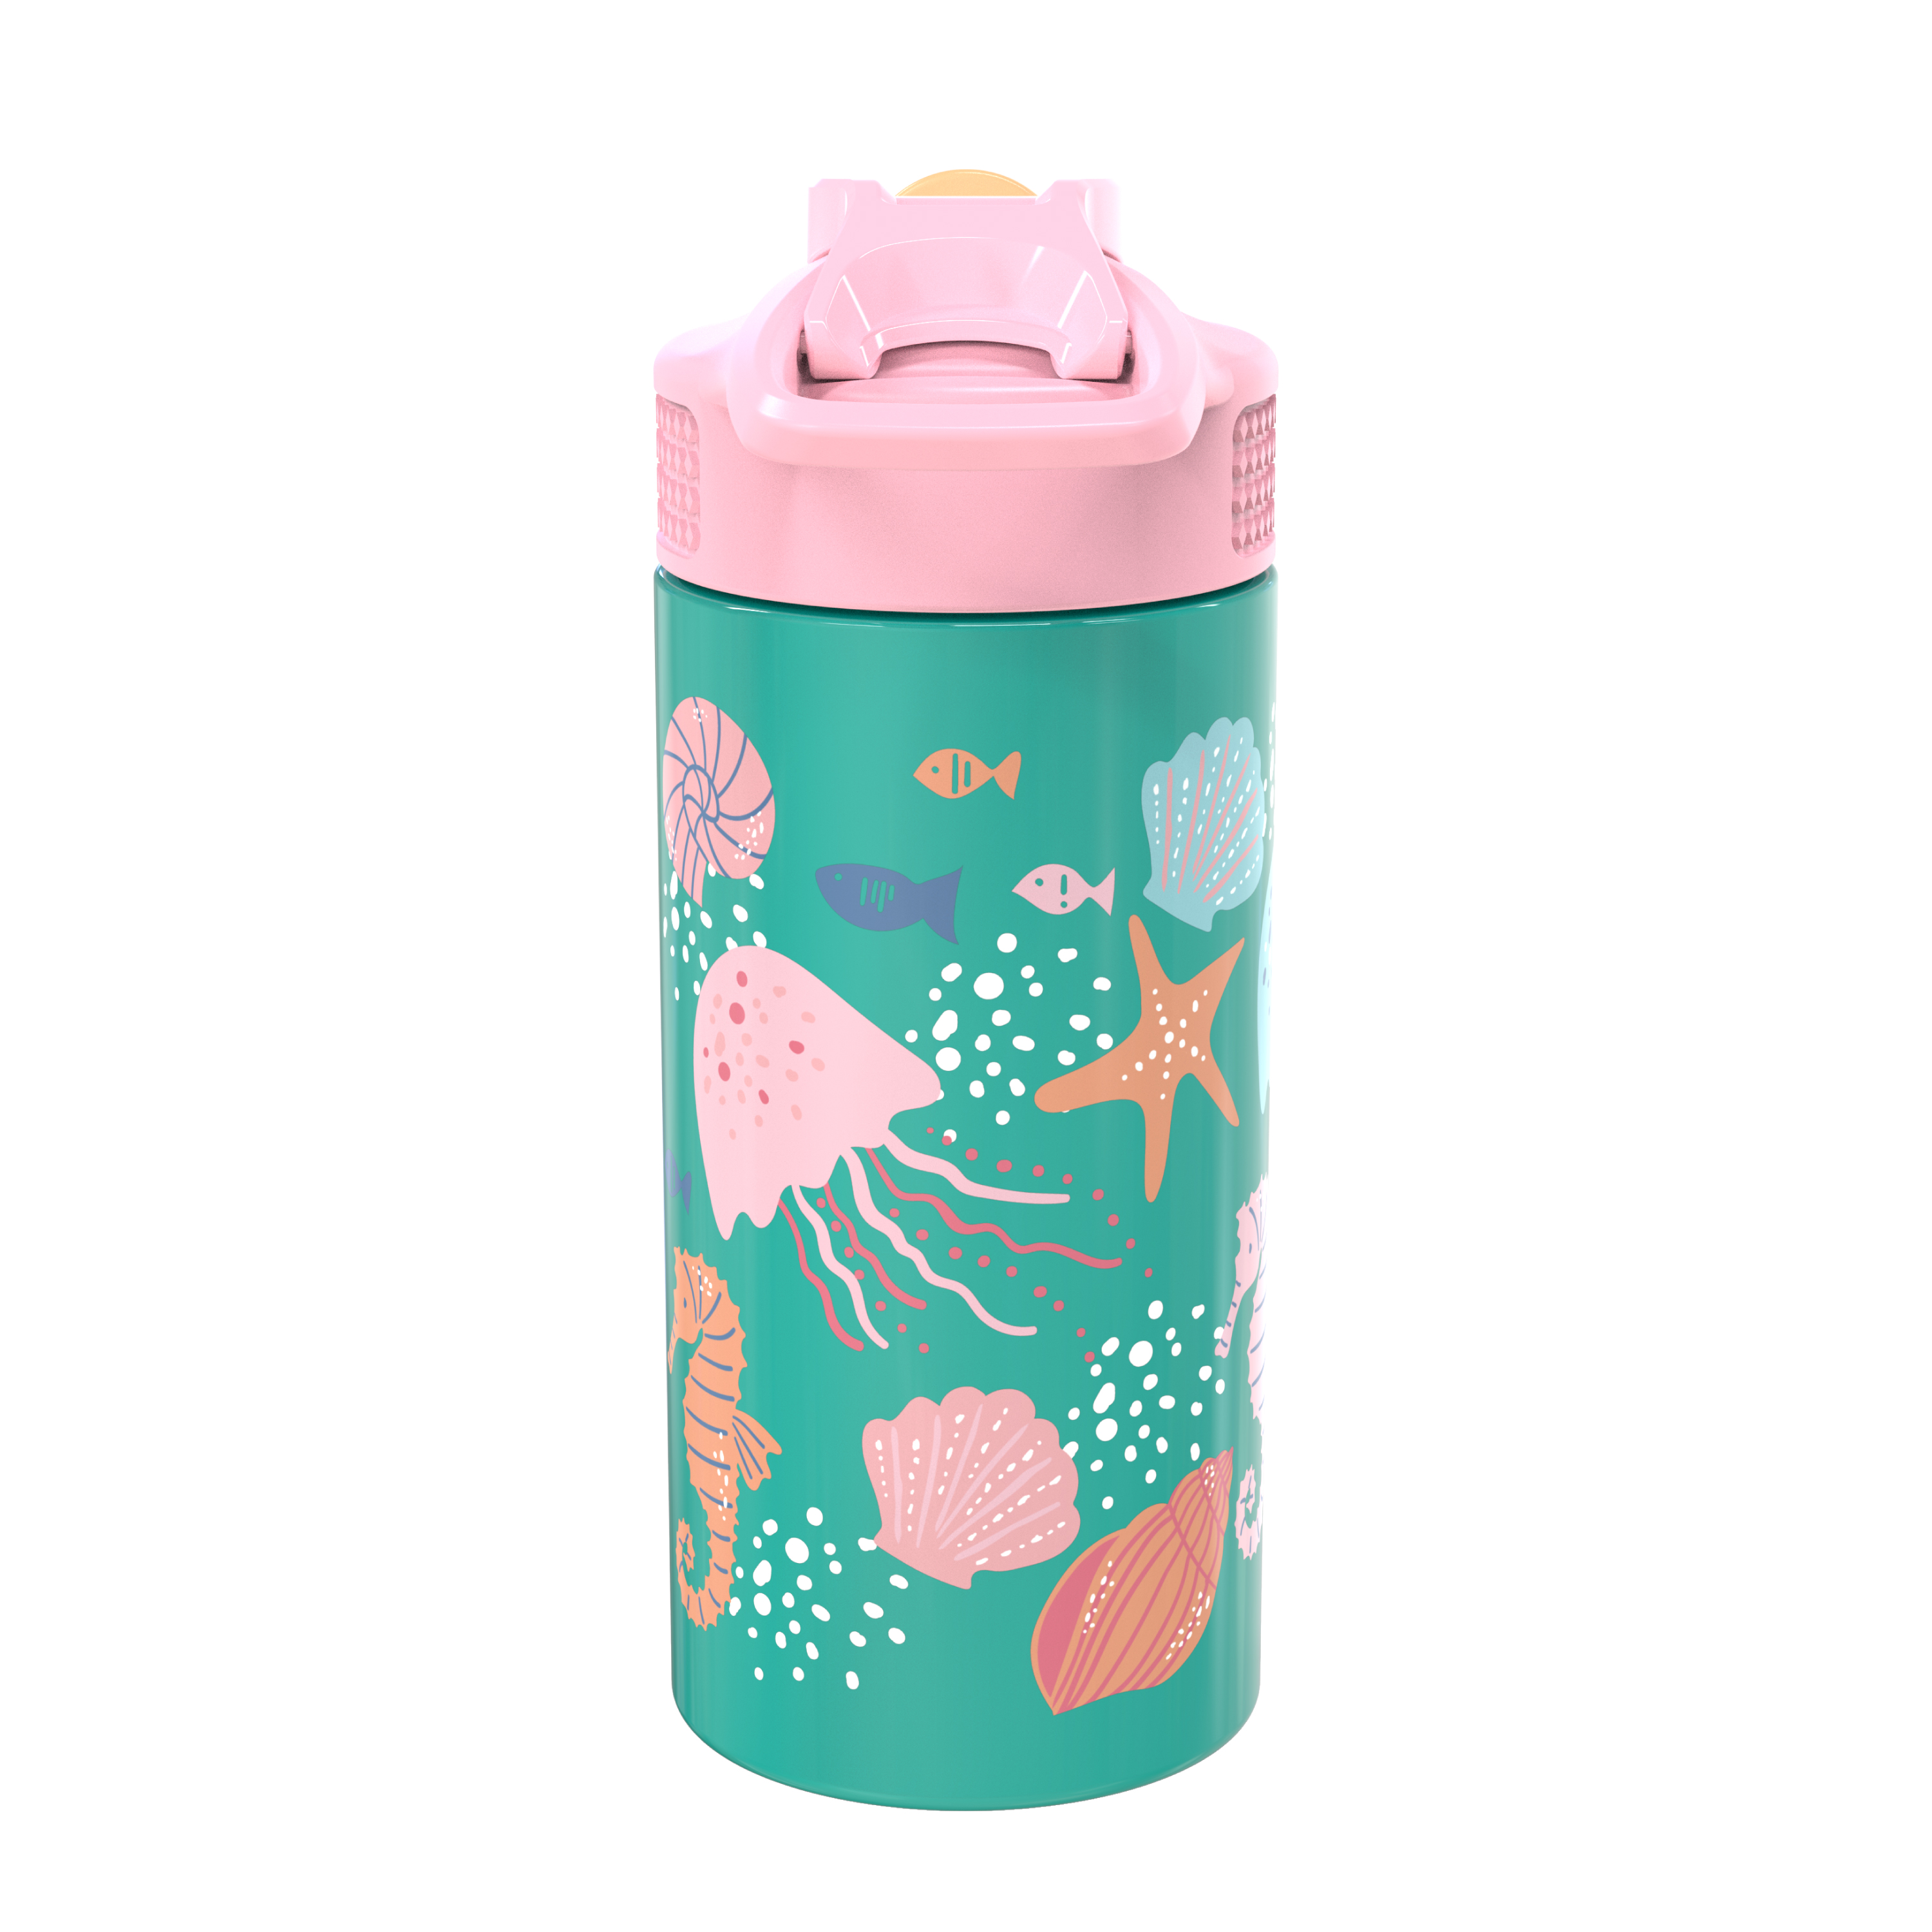 Seashells 14 ounce Stainless Steel Vacuum Insulated Water Bottle, Multicolored slideshow image 3